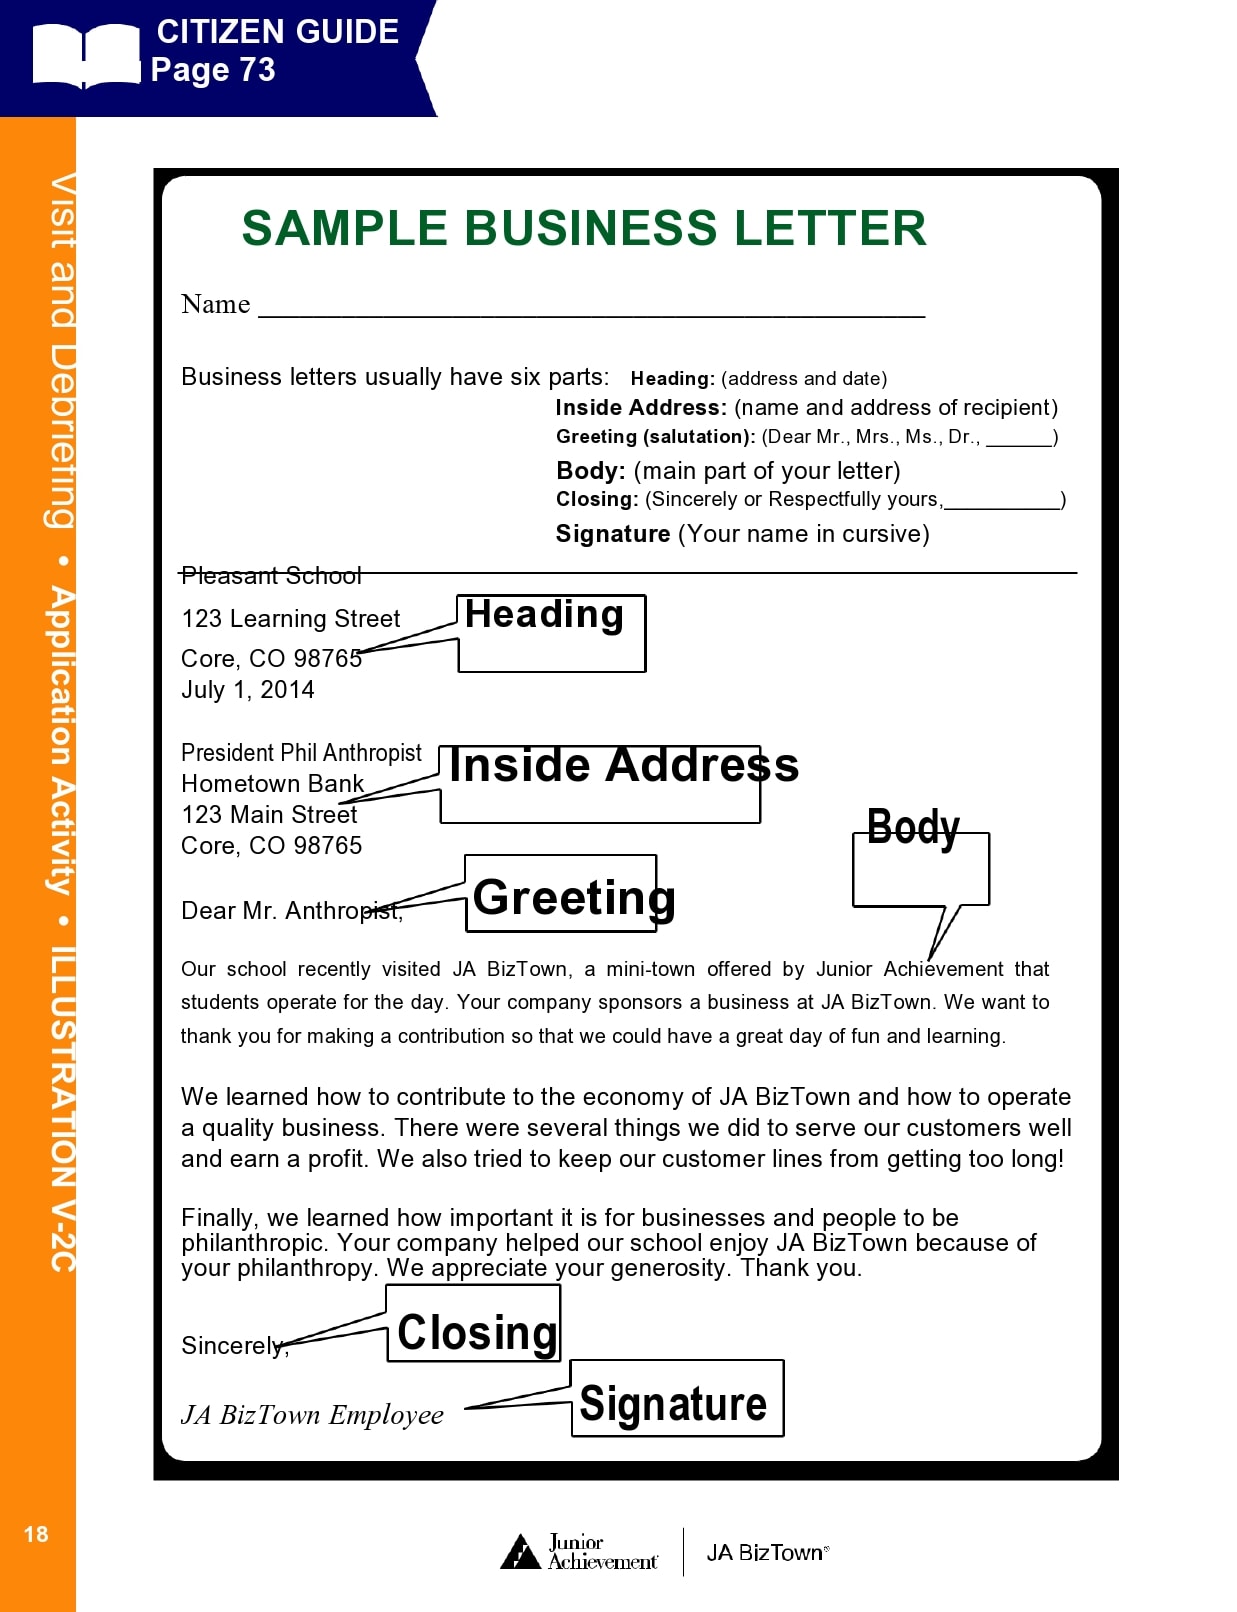  Parts Of A Formal Business Letter 13 Major Structure Or Parts Of A 